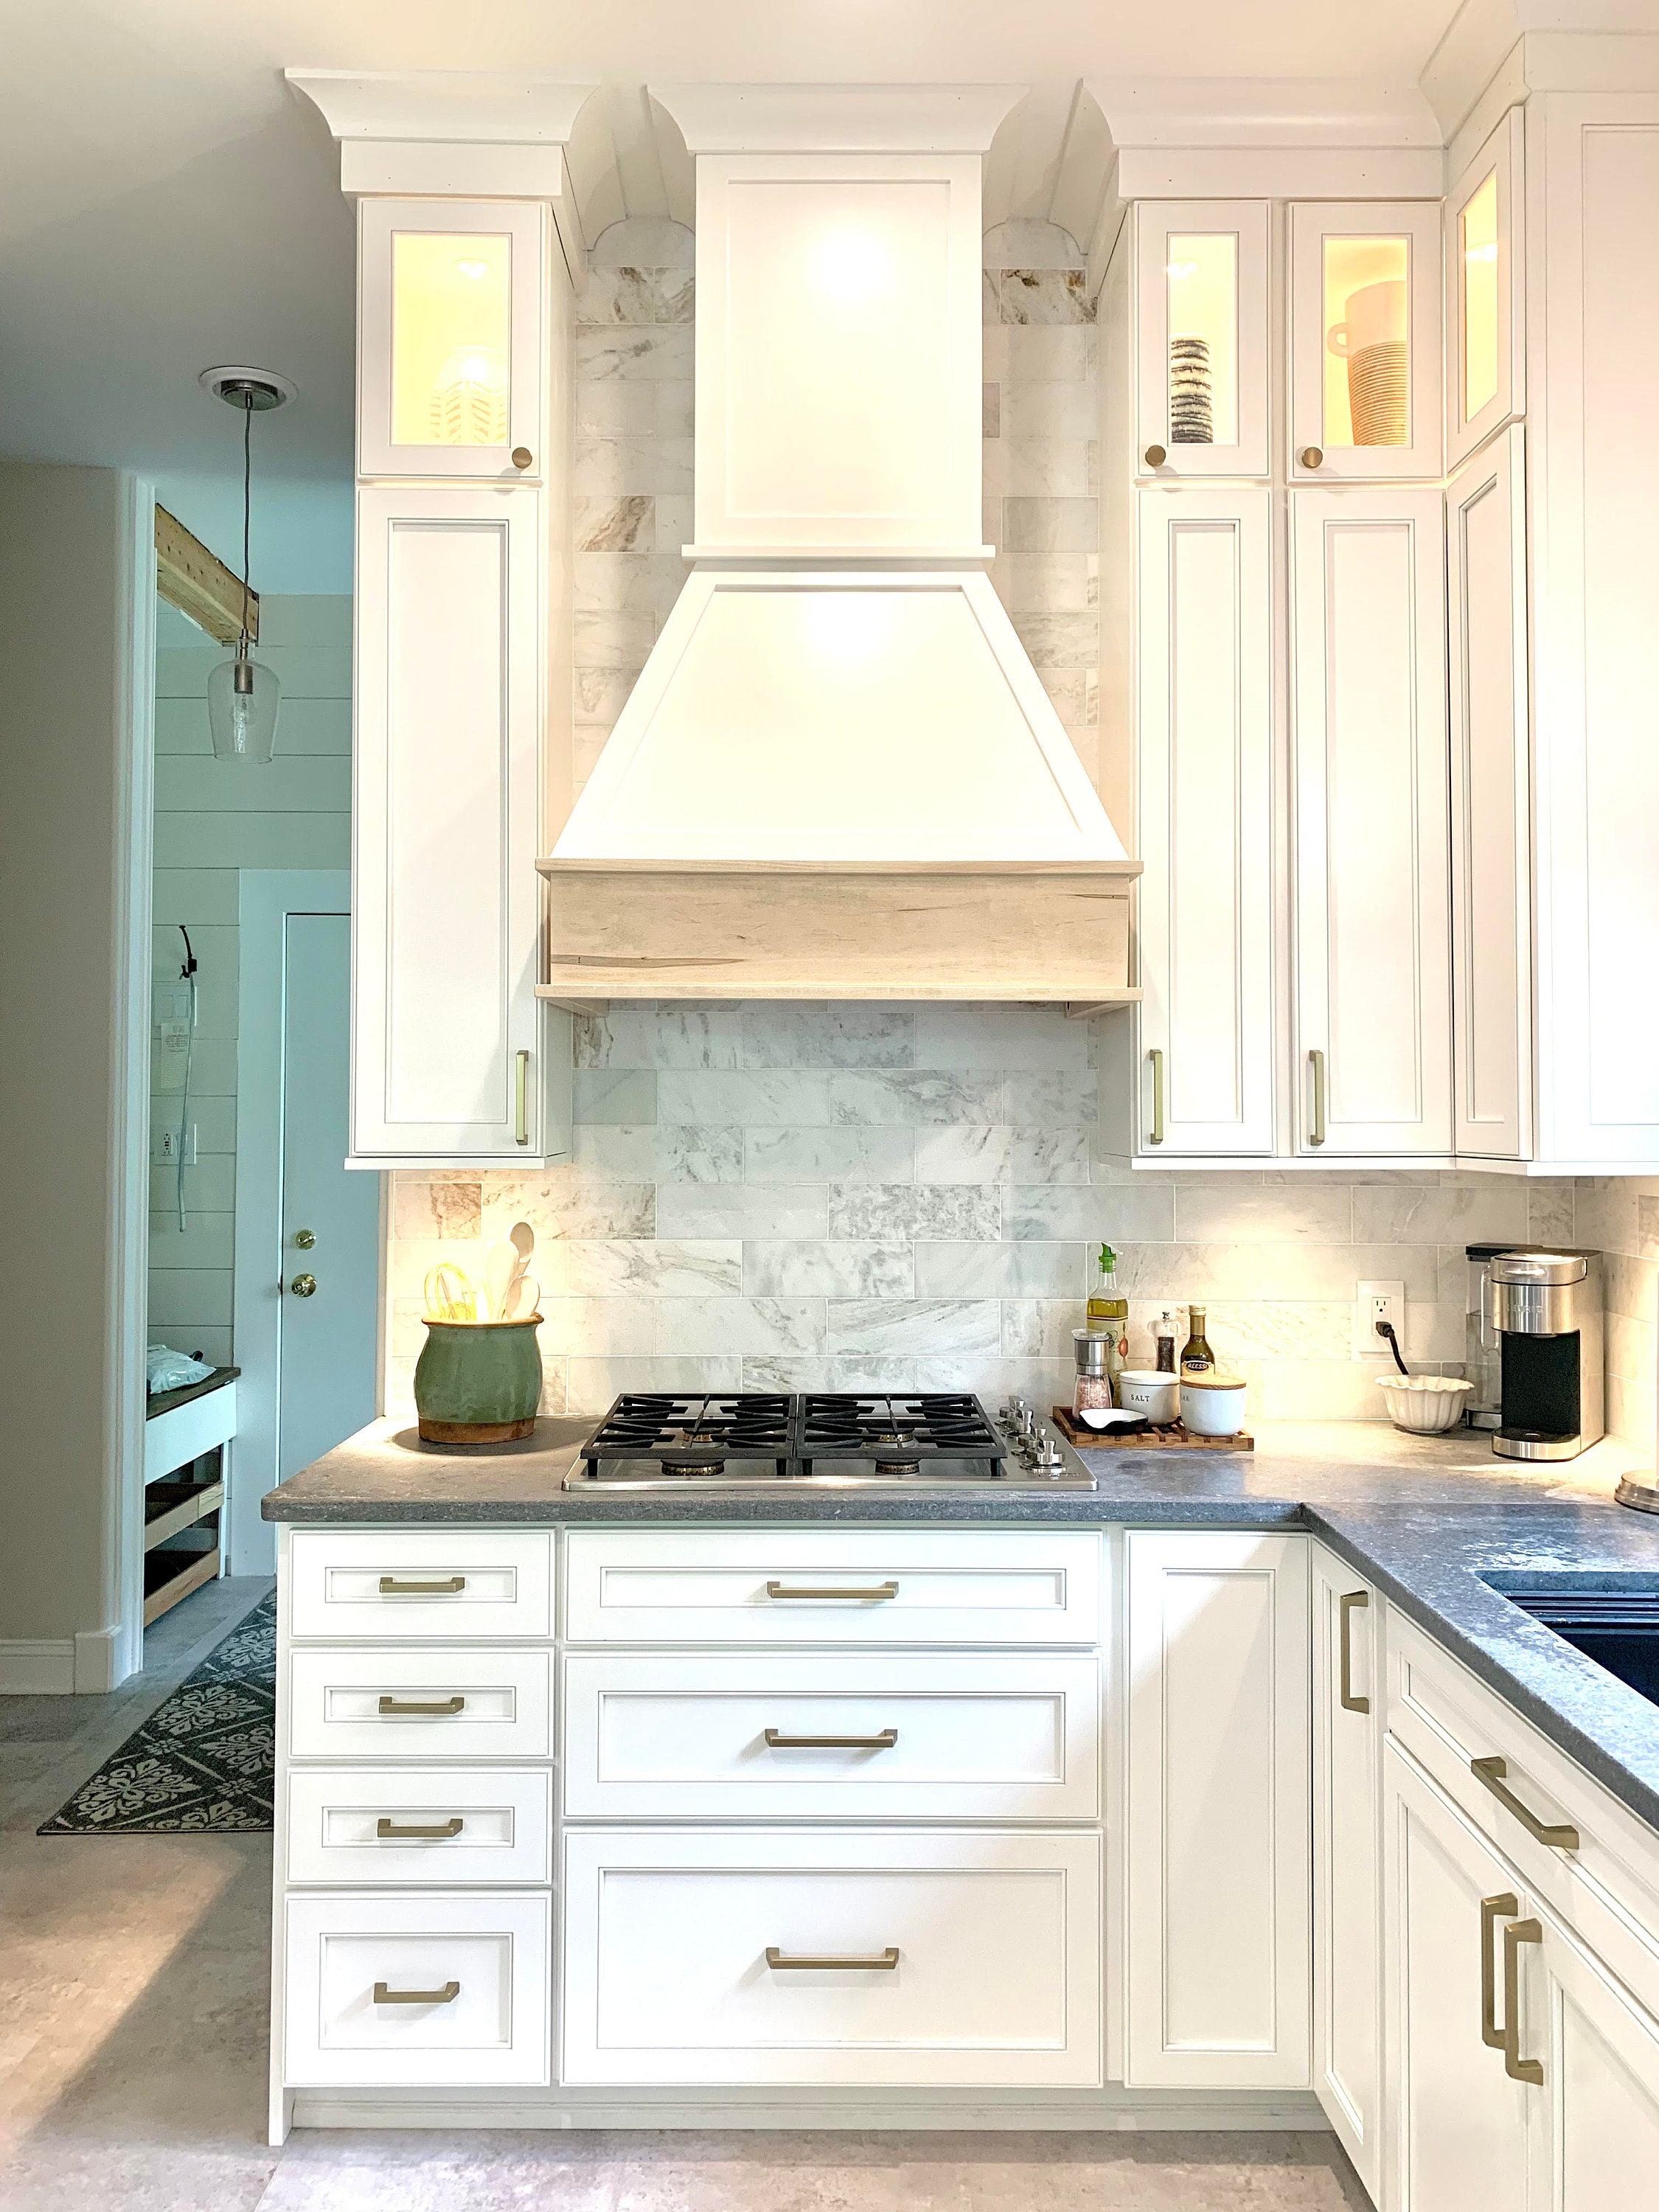 Kitchen Vent-hood Makeover - TOUCHES OF WOOD